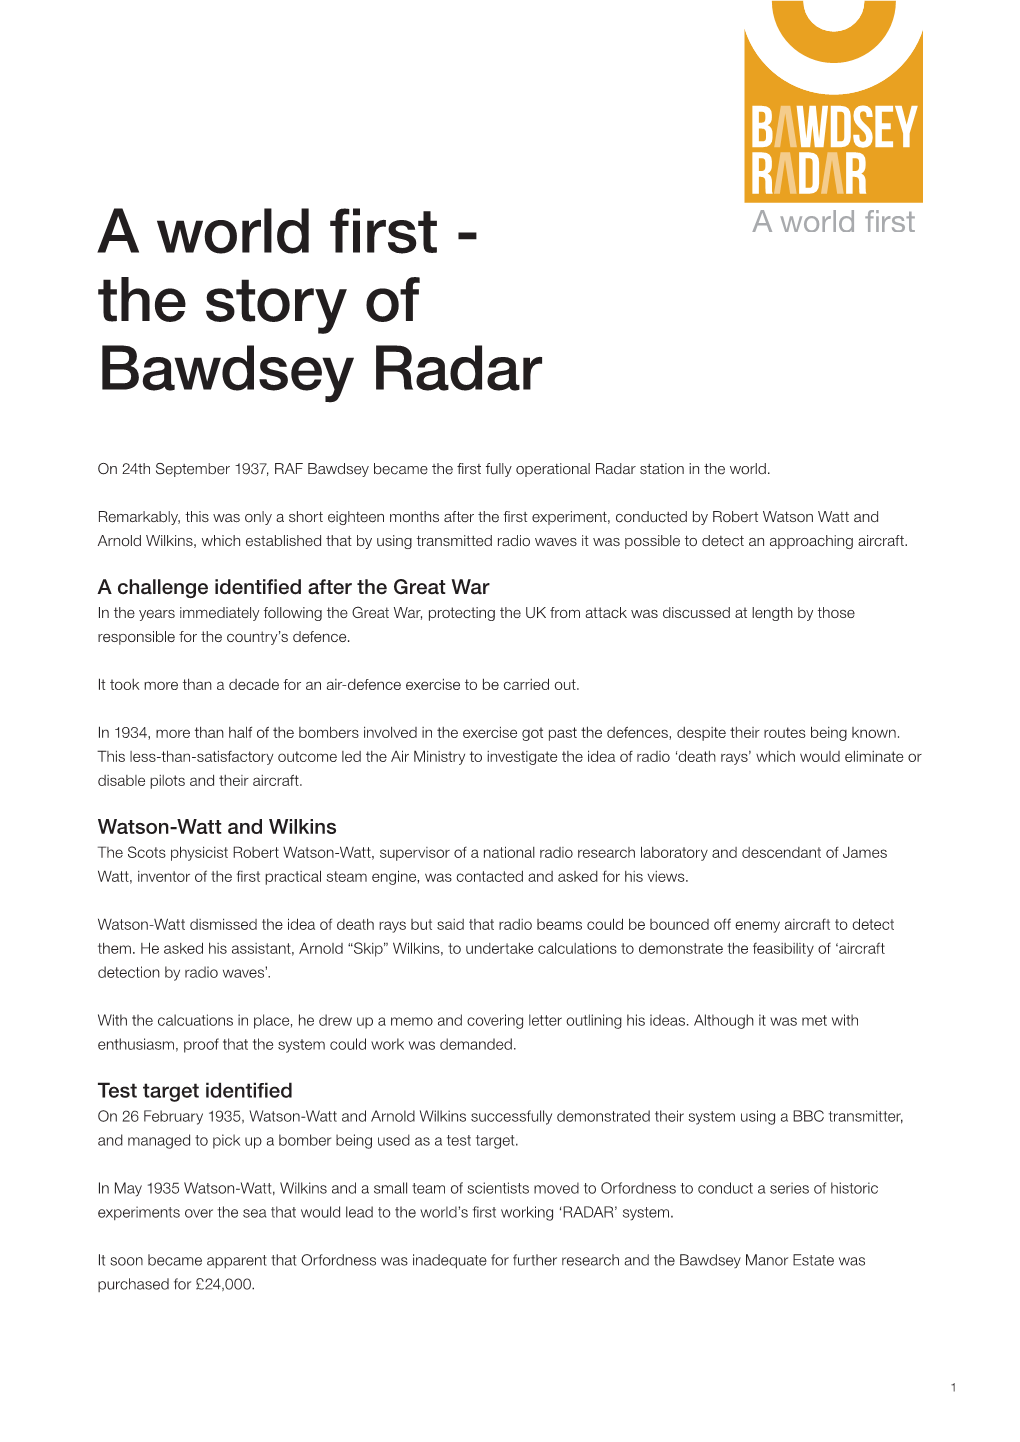 A World First - the Story of Bawdsey Radar